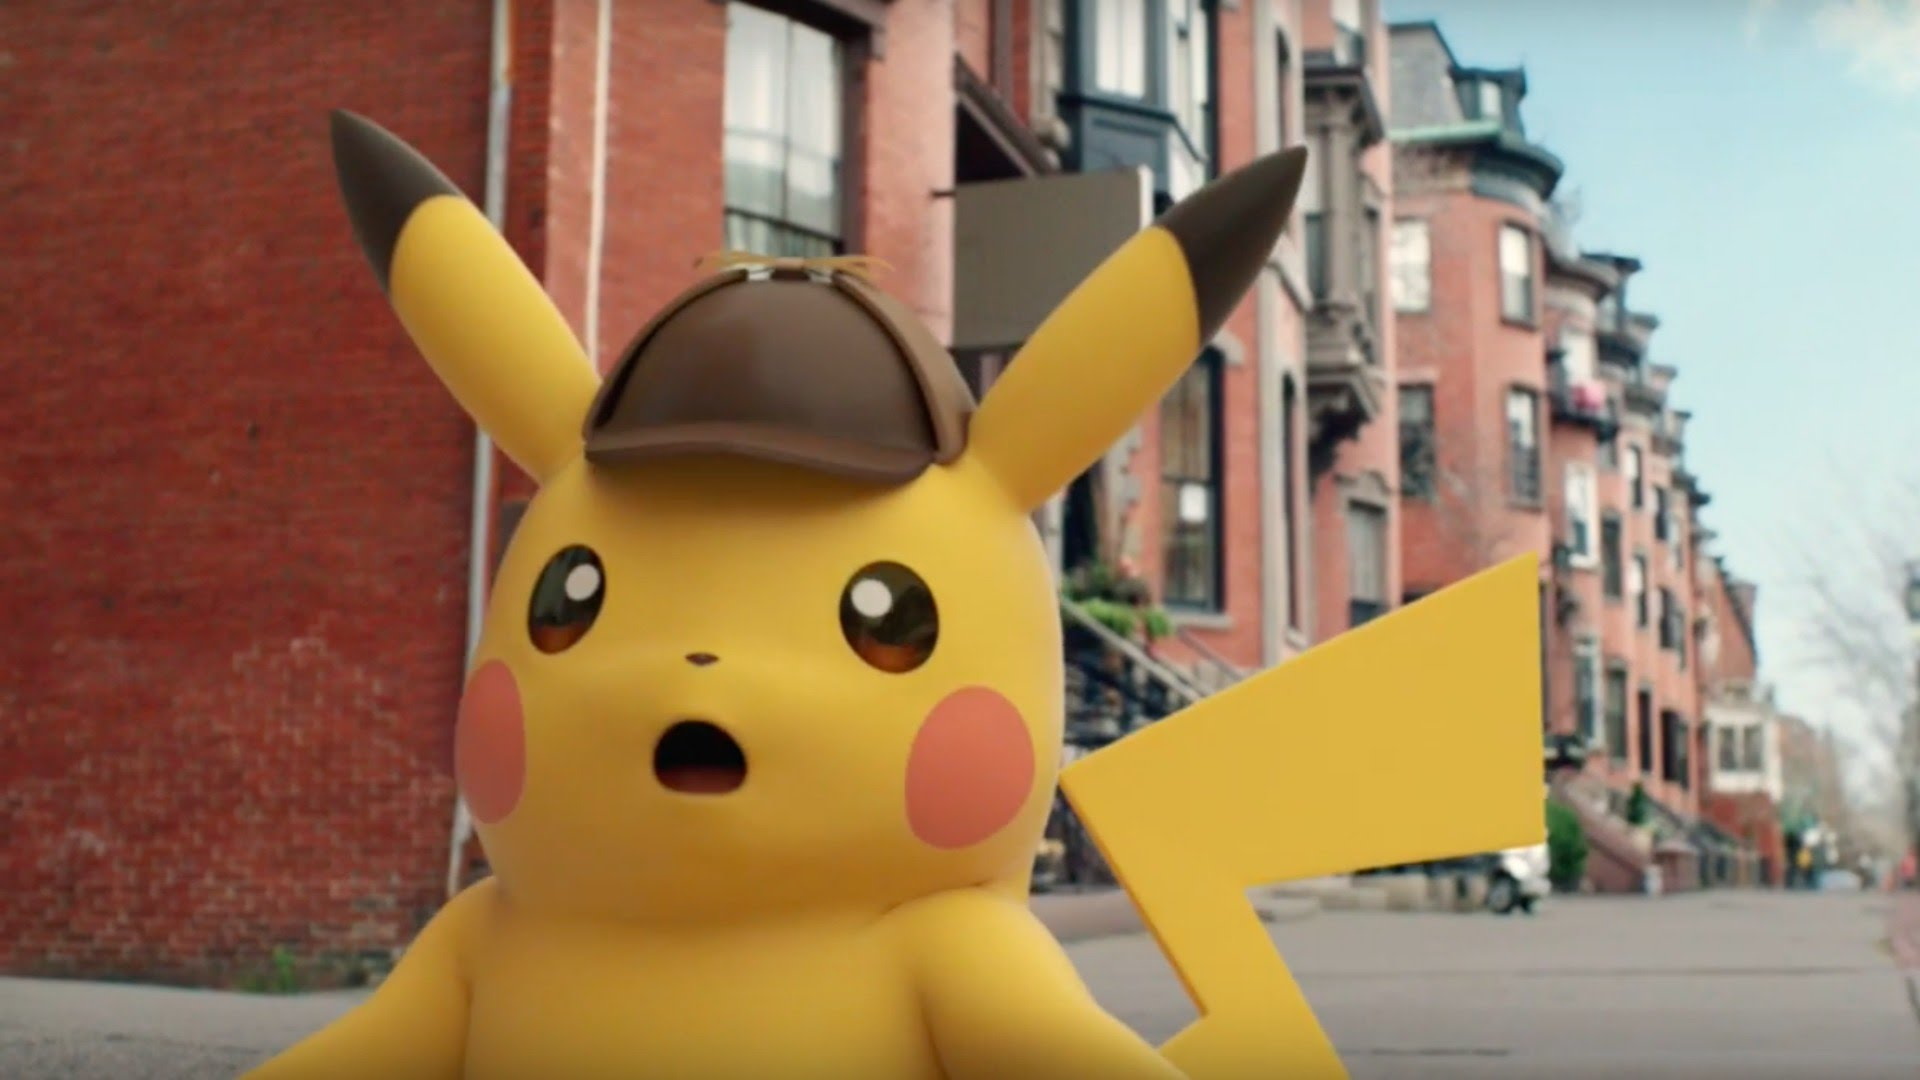 Pokémon GO developer lays off 8% of staff, cancels 4 new projects